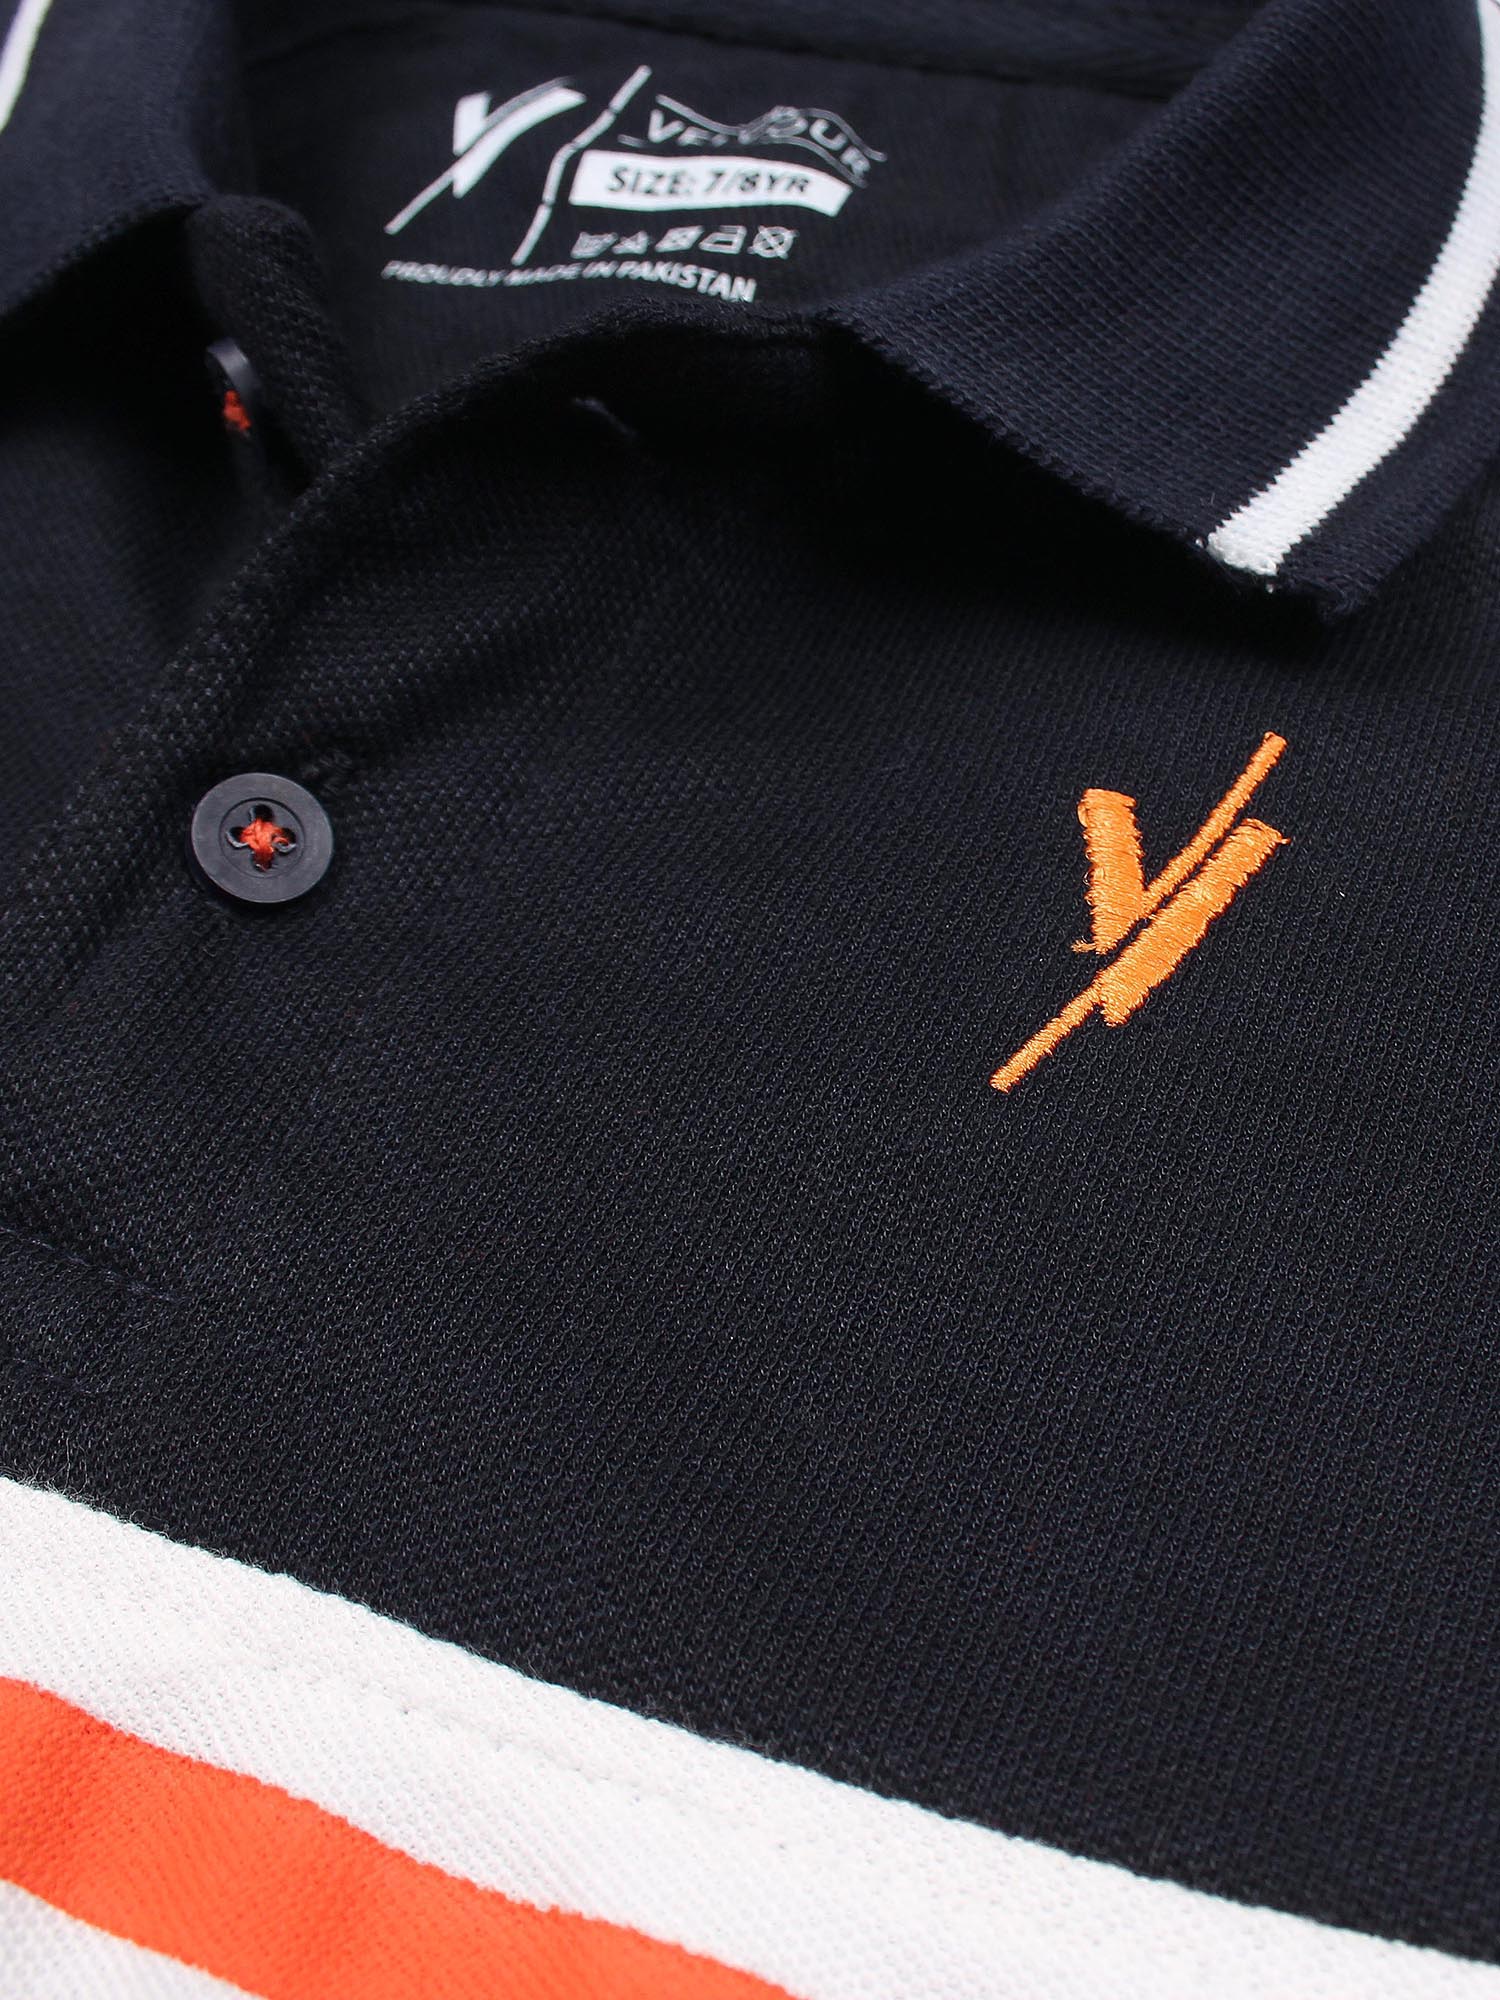 Tipping Collar Boys Polo Shirt Velvour Embroidered  Navy With Orange stripe